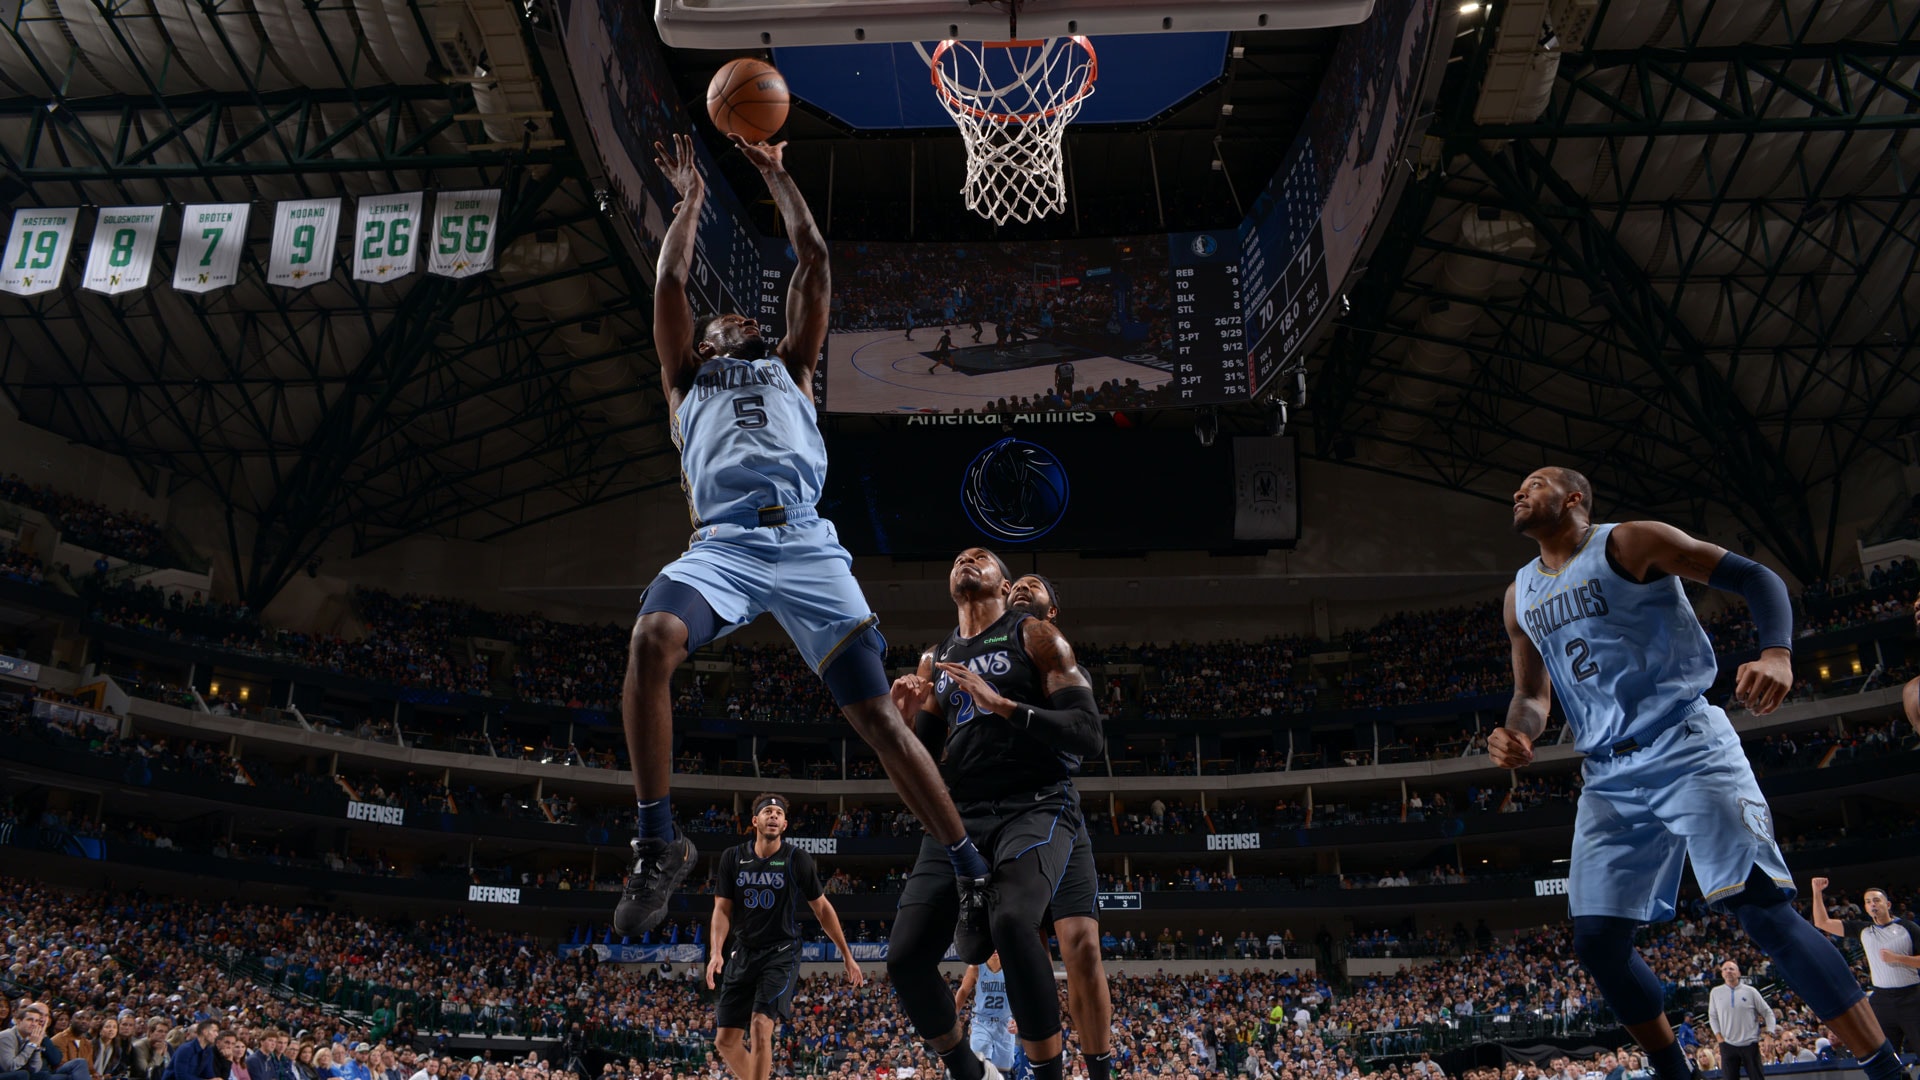 gDALLAS, TX - DECEMBER 1: Vince Williams Jr. #5 of the Memphis Grizzlies drives to the basket during the game against the Dallas Mavericks on December 1, 2023 at the American Airlines Center in Dallas, Texas.